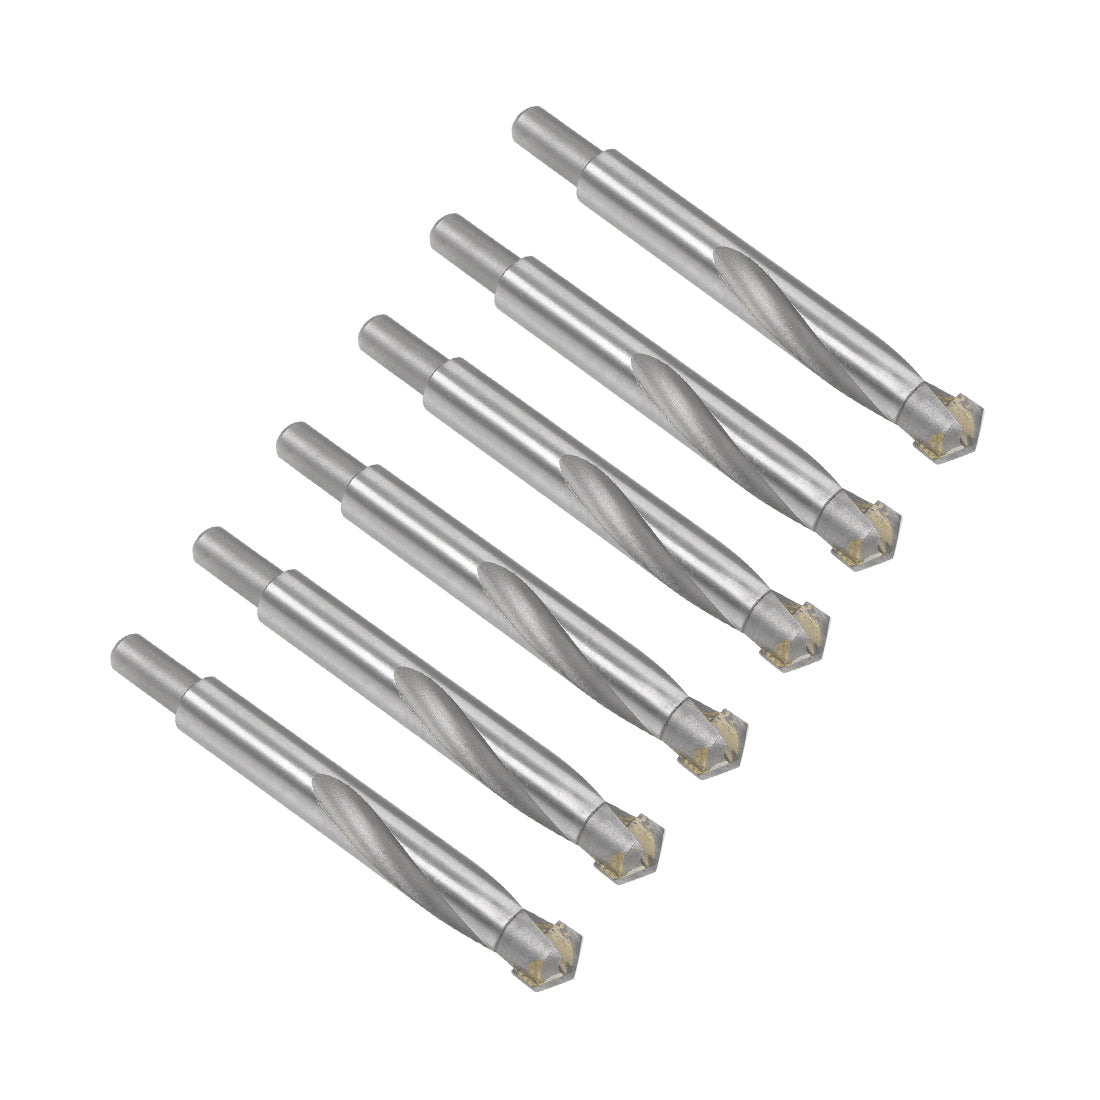 uxcell Uxcell 15mm Cemented Carbide Twist Drill Bits for Stainless Steel Copper Aluminum 6 Pcs